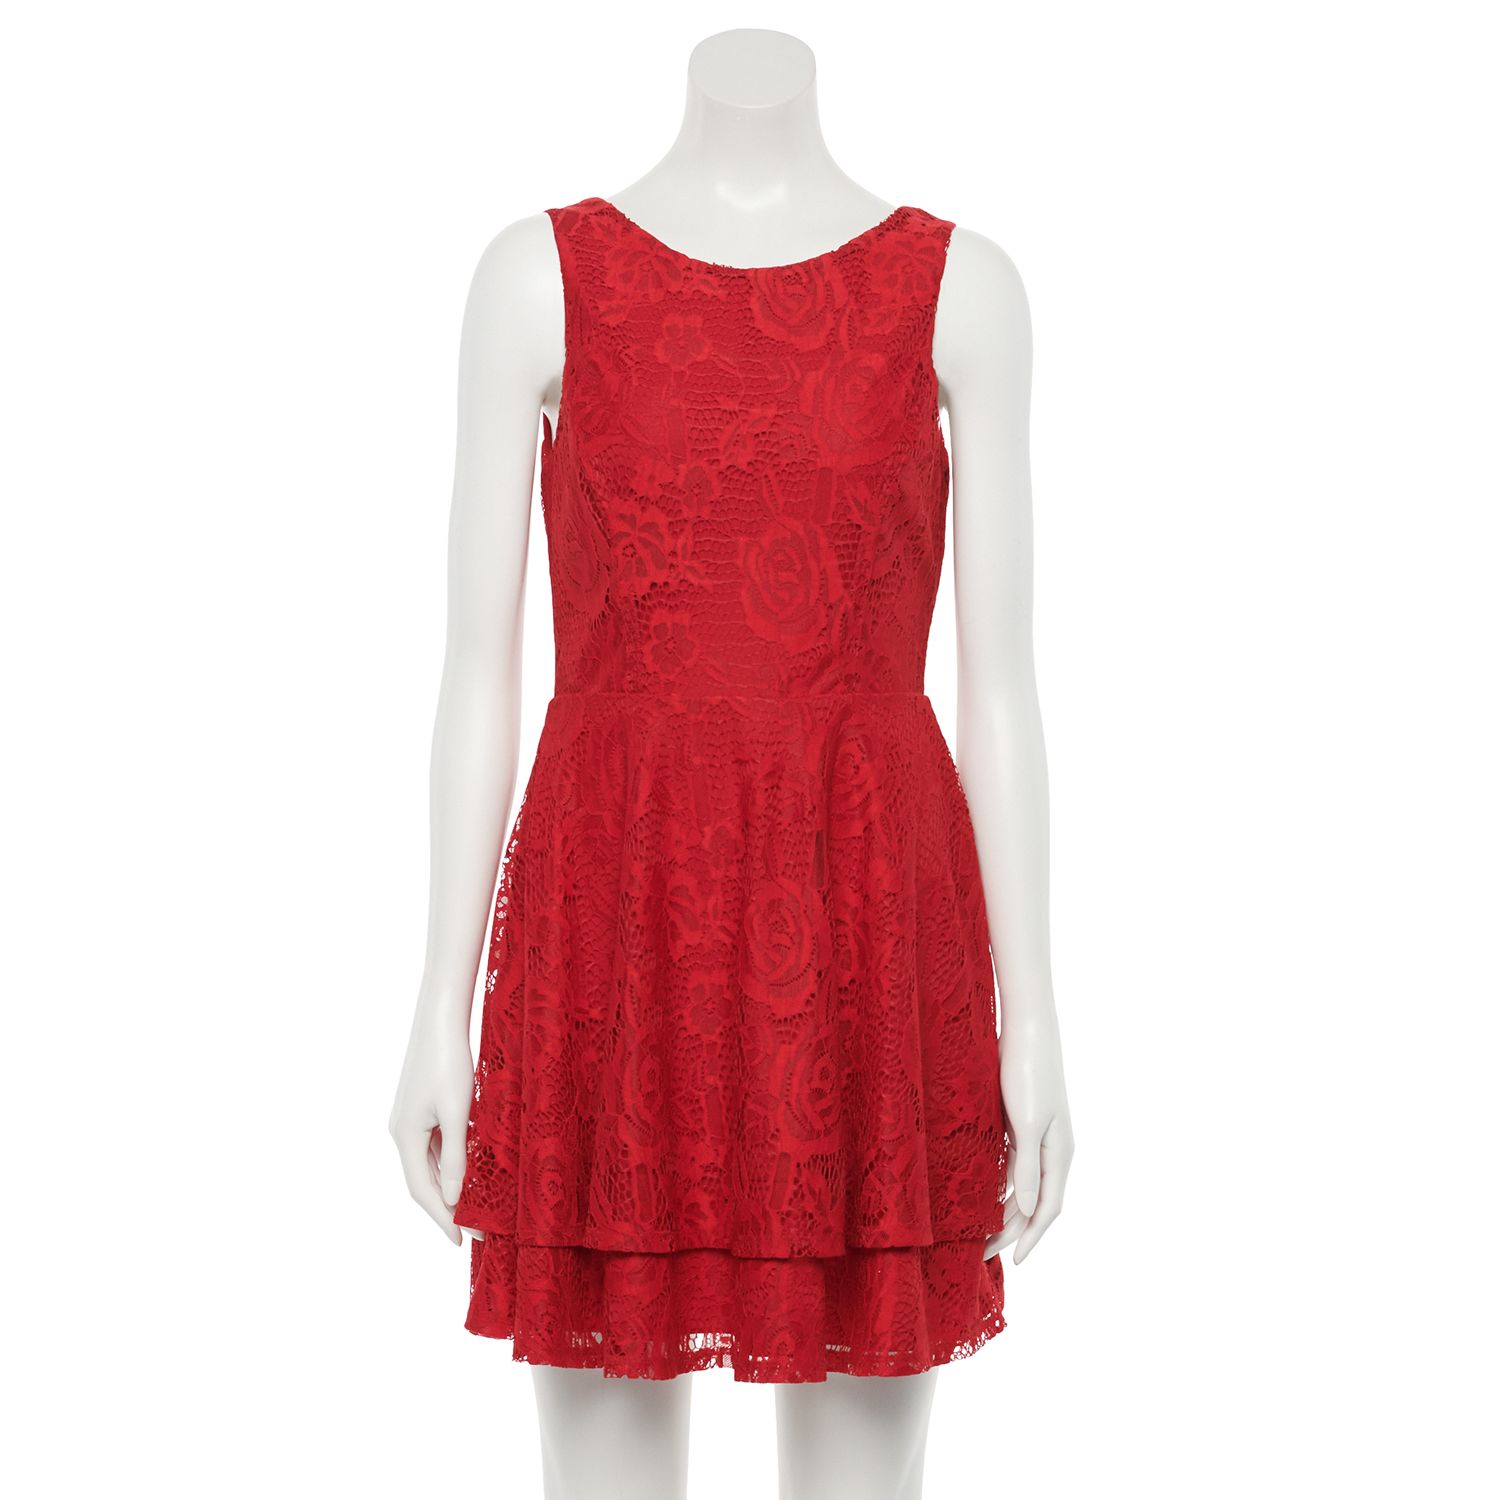 kohl's fit and flare dresses